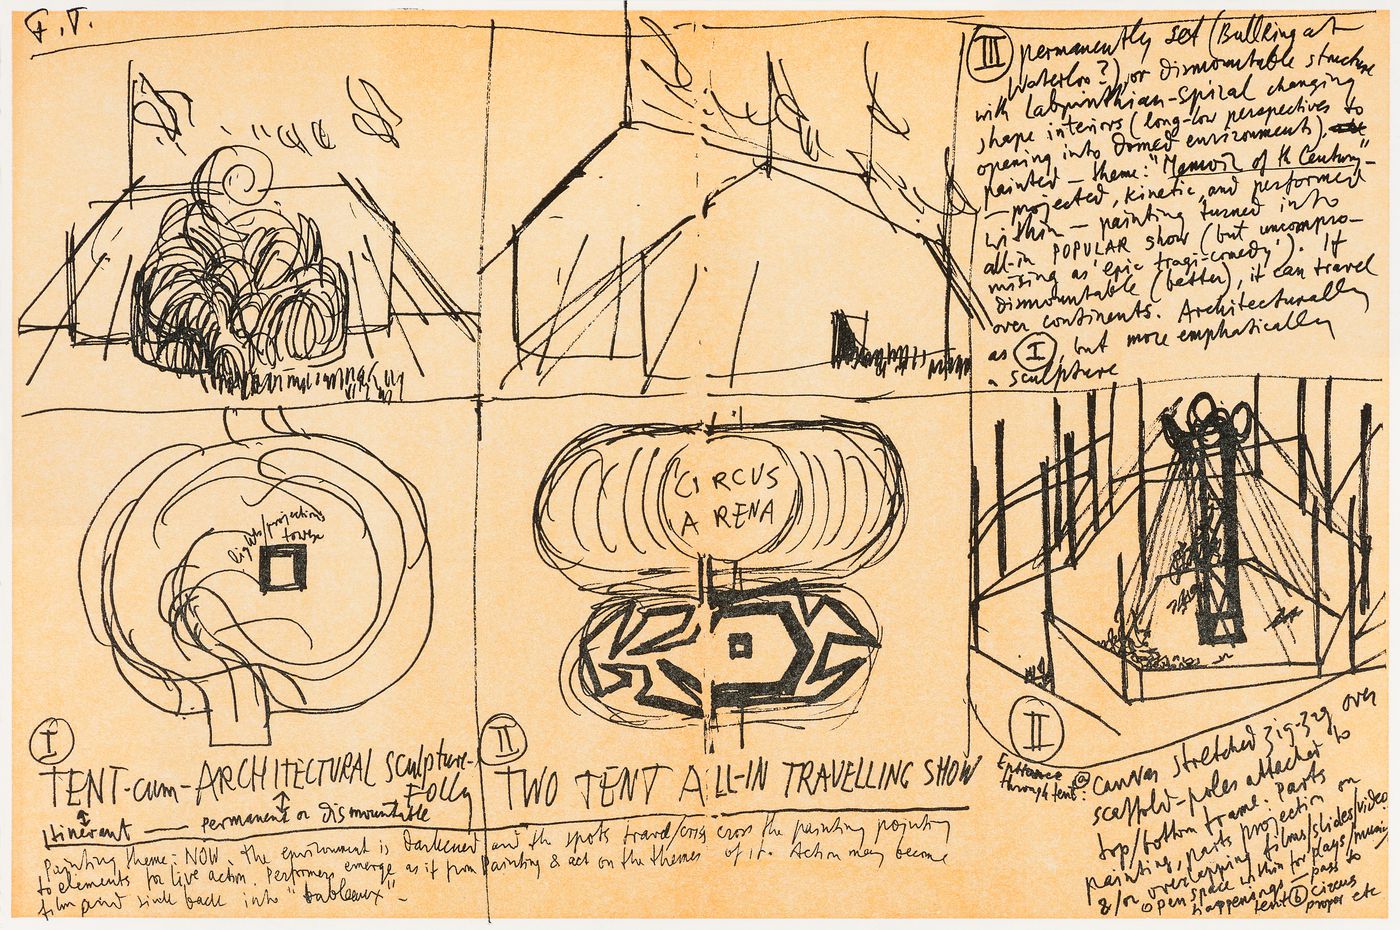 Illustration showing conceptual sketches and notes for Waterloo Circus project